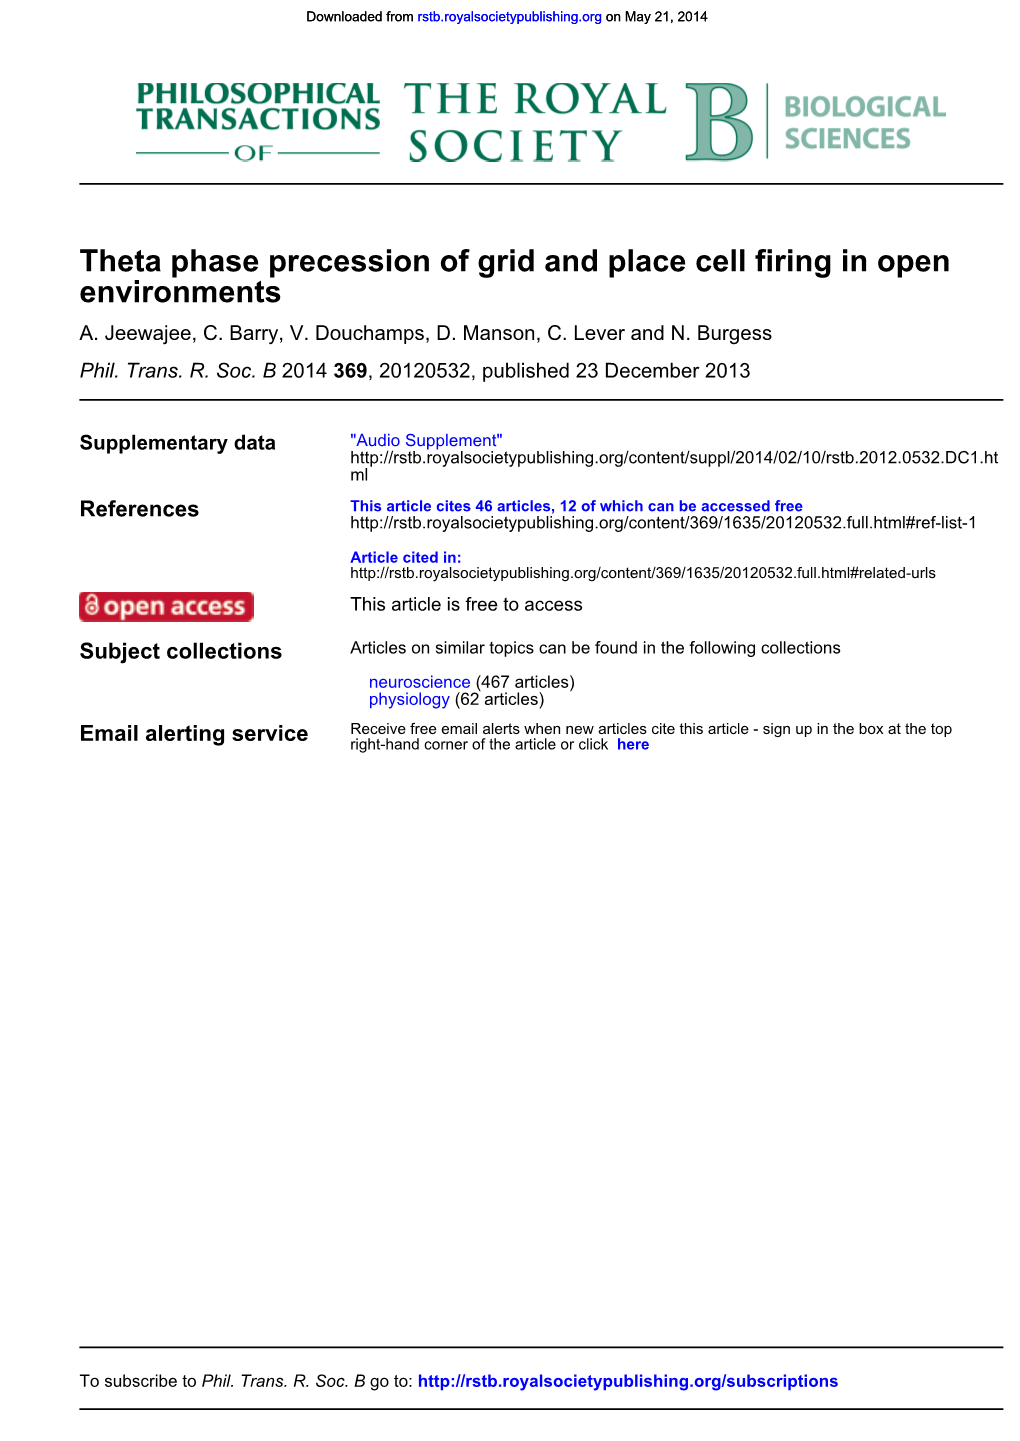 Environments Theta Phase Precession of Grid and Place Cell Firing in Open